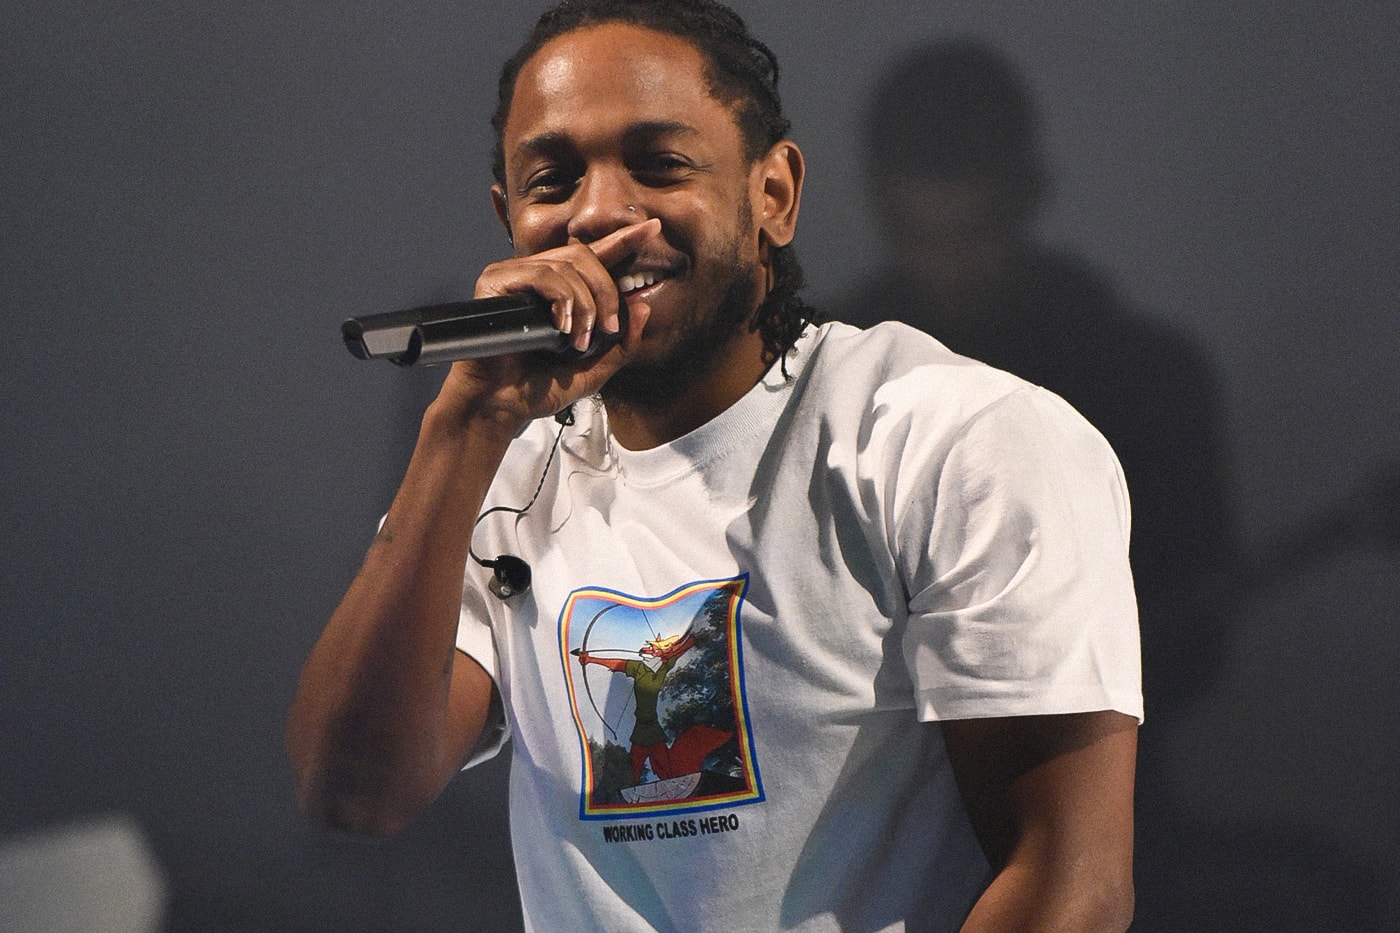 All Songs from kendrick lamar Mr. Morale the Big Steppers Charts billboard Hot 100 four top 10